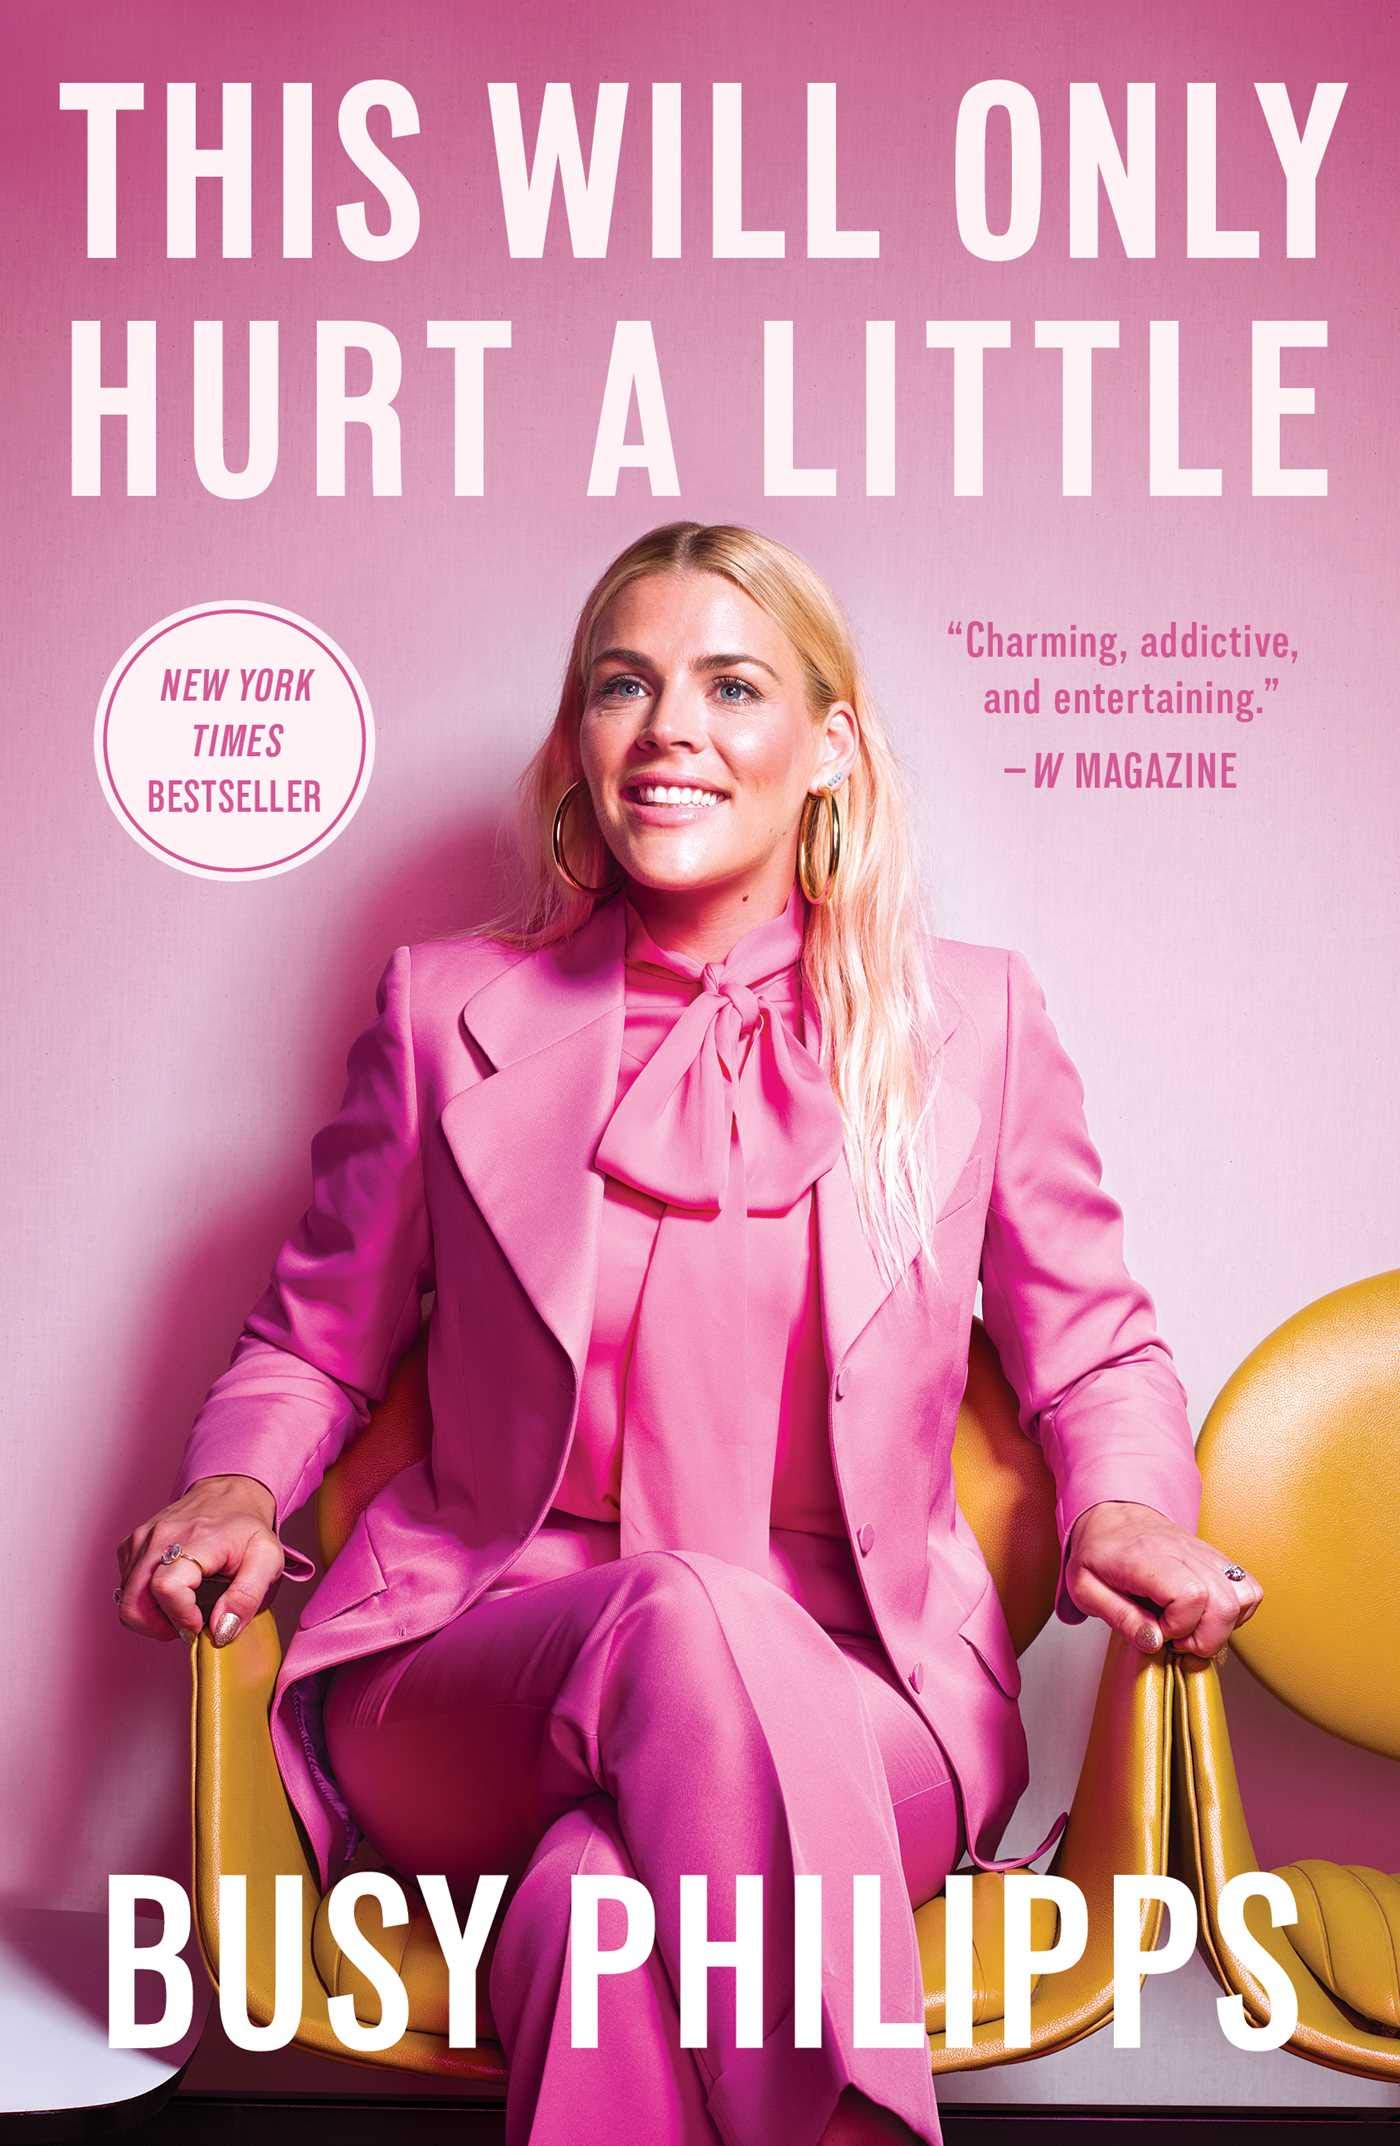 This Will Only Hurt A Little by Busy Philipps 2